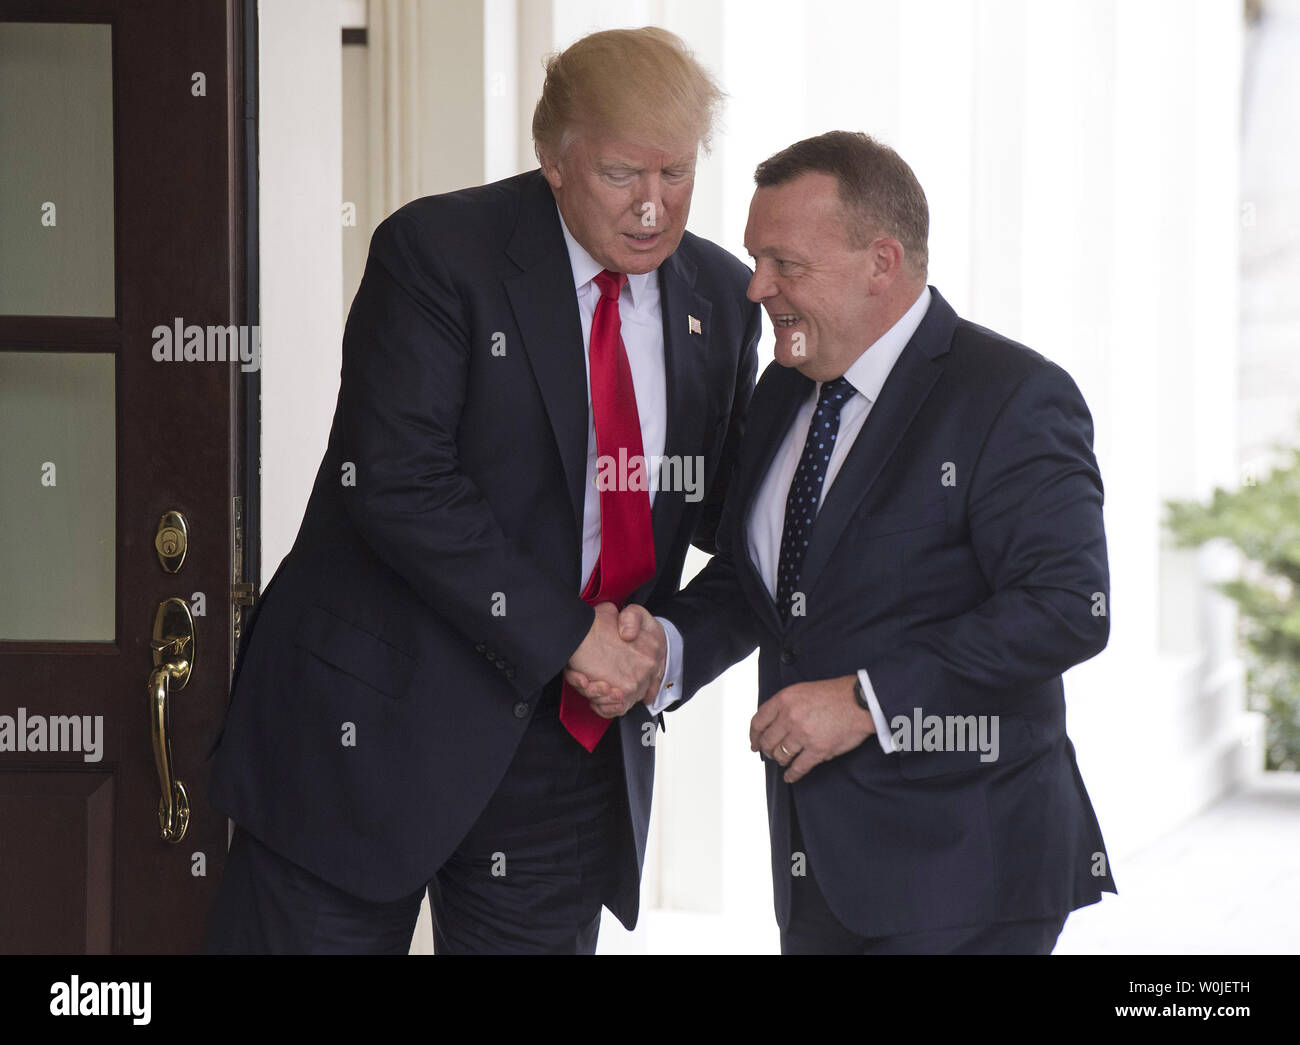 President Donald Trump welcomes Prime Minister Lars Lokke Rasmussen of Denmark to the White House in Washington, D.C. on March 30, 2017. Photo by Kevin Dietsch/UPI Stock Photo